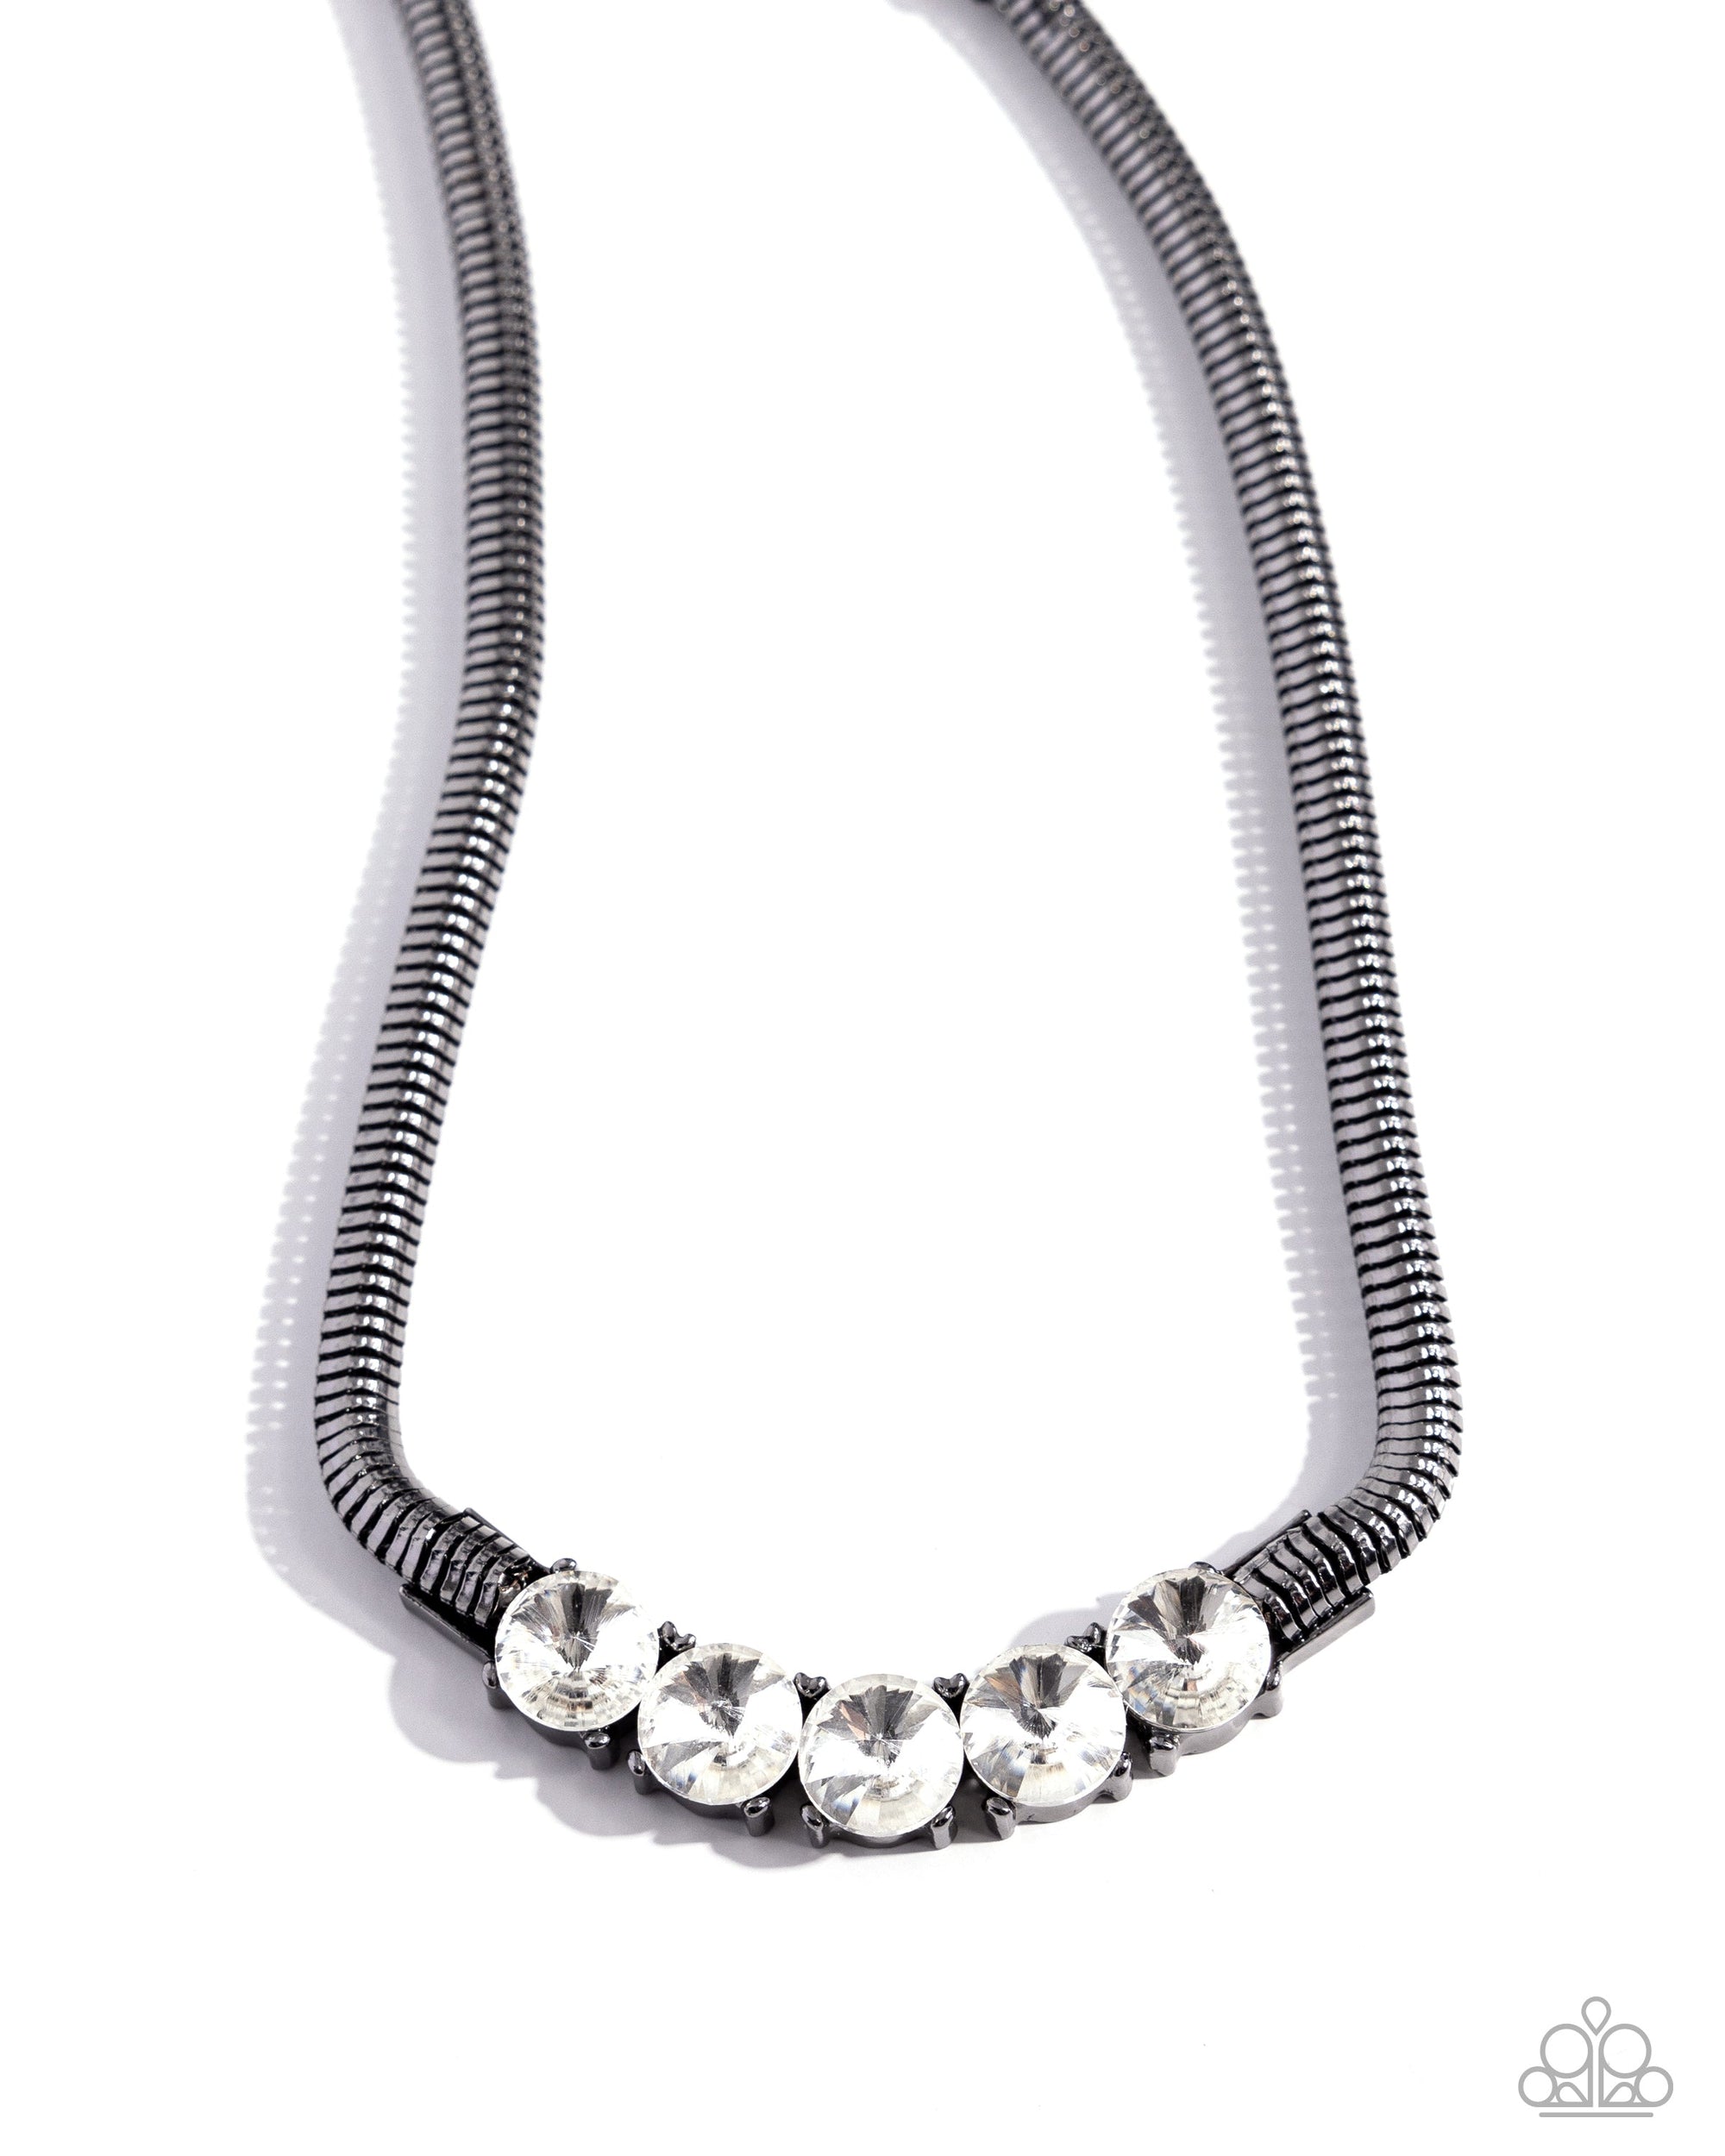 Musings Makeover Gunmetal Black & White Rhinestone Necklace - Paparazzi Accessories- lightbox - CarasShop.com - $5 Jewelry by Cara Jewels